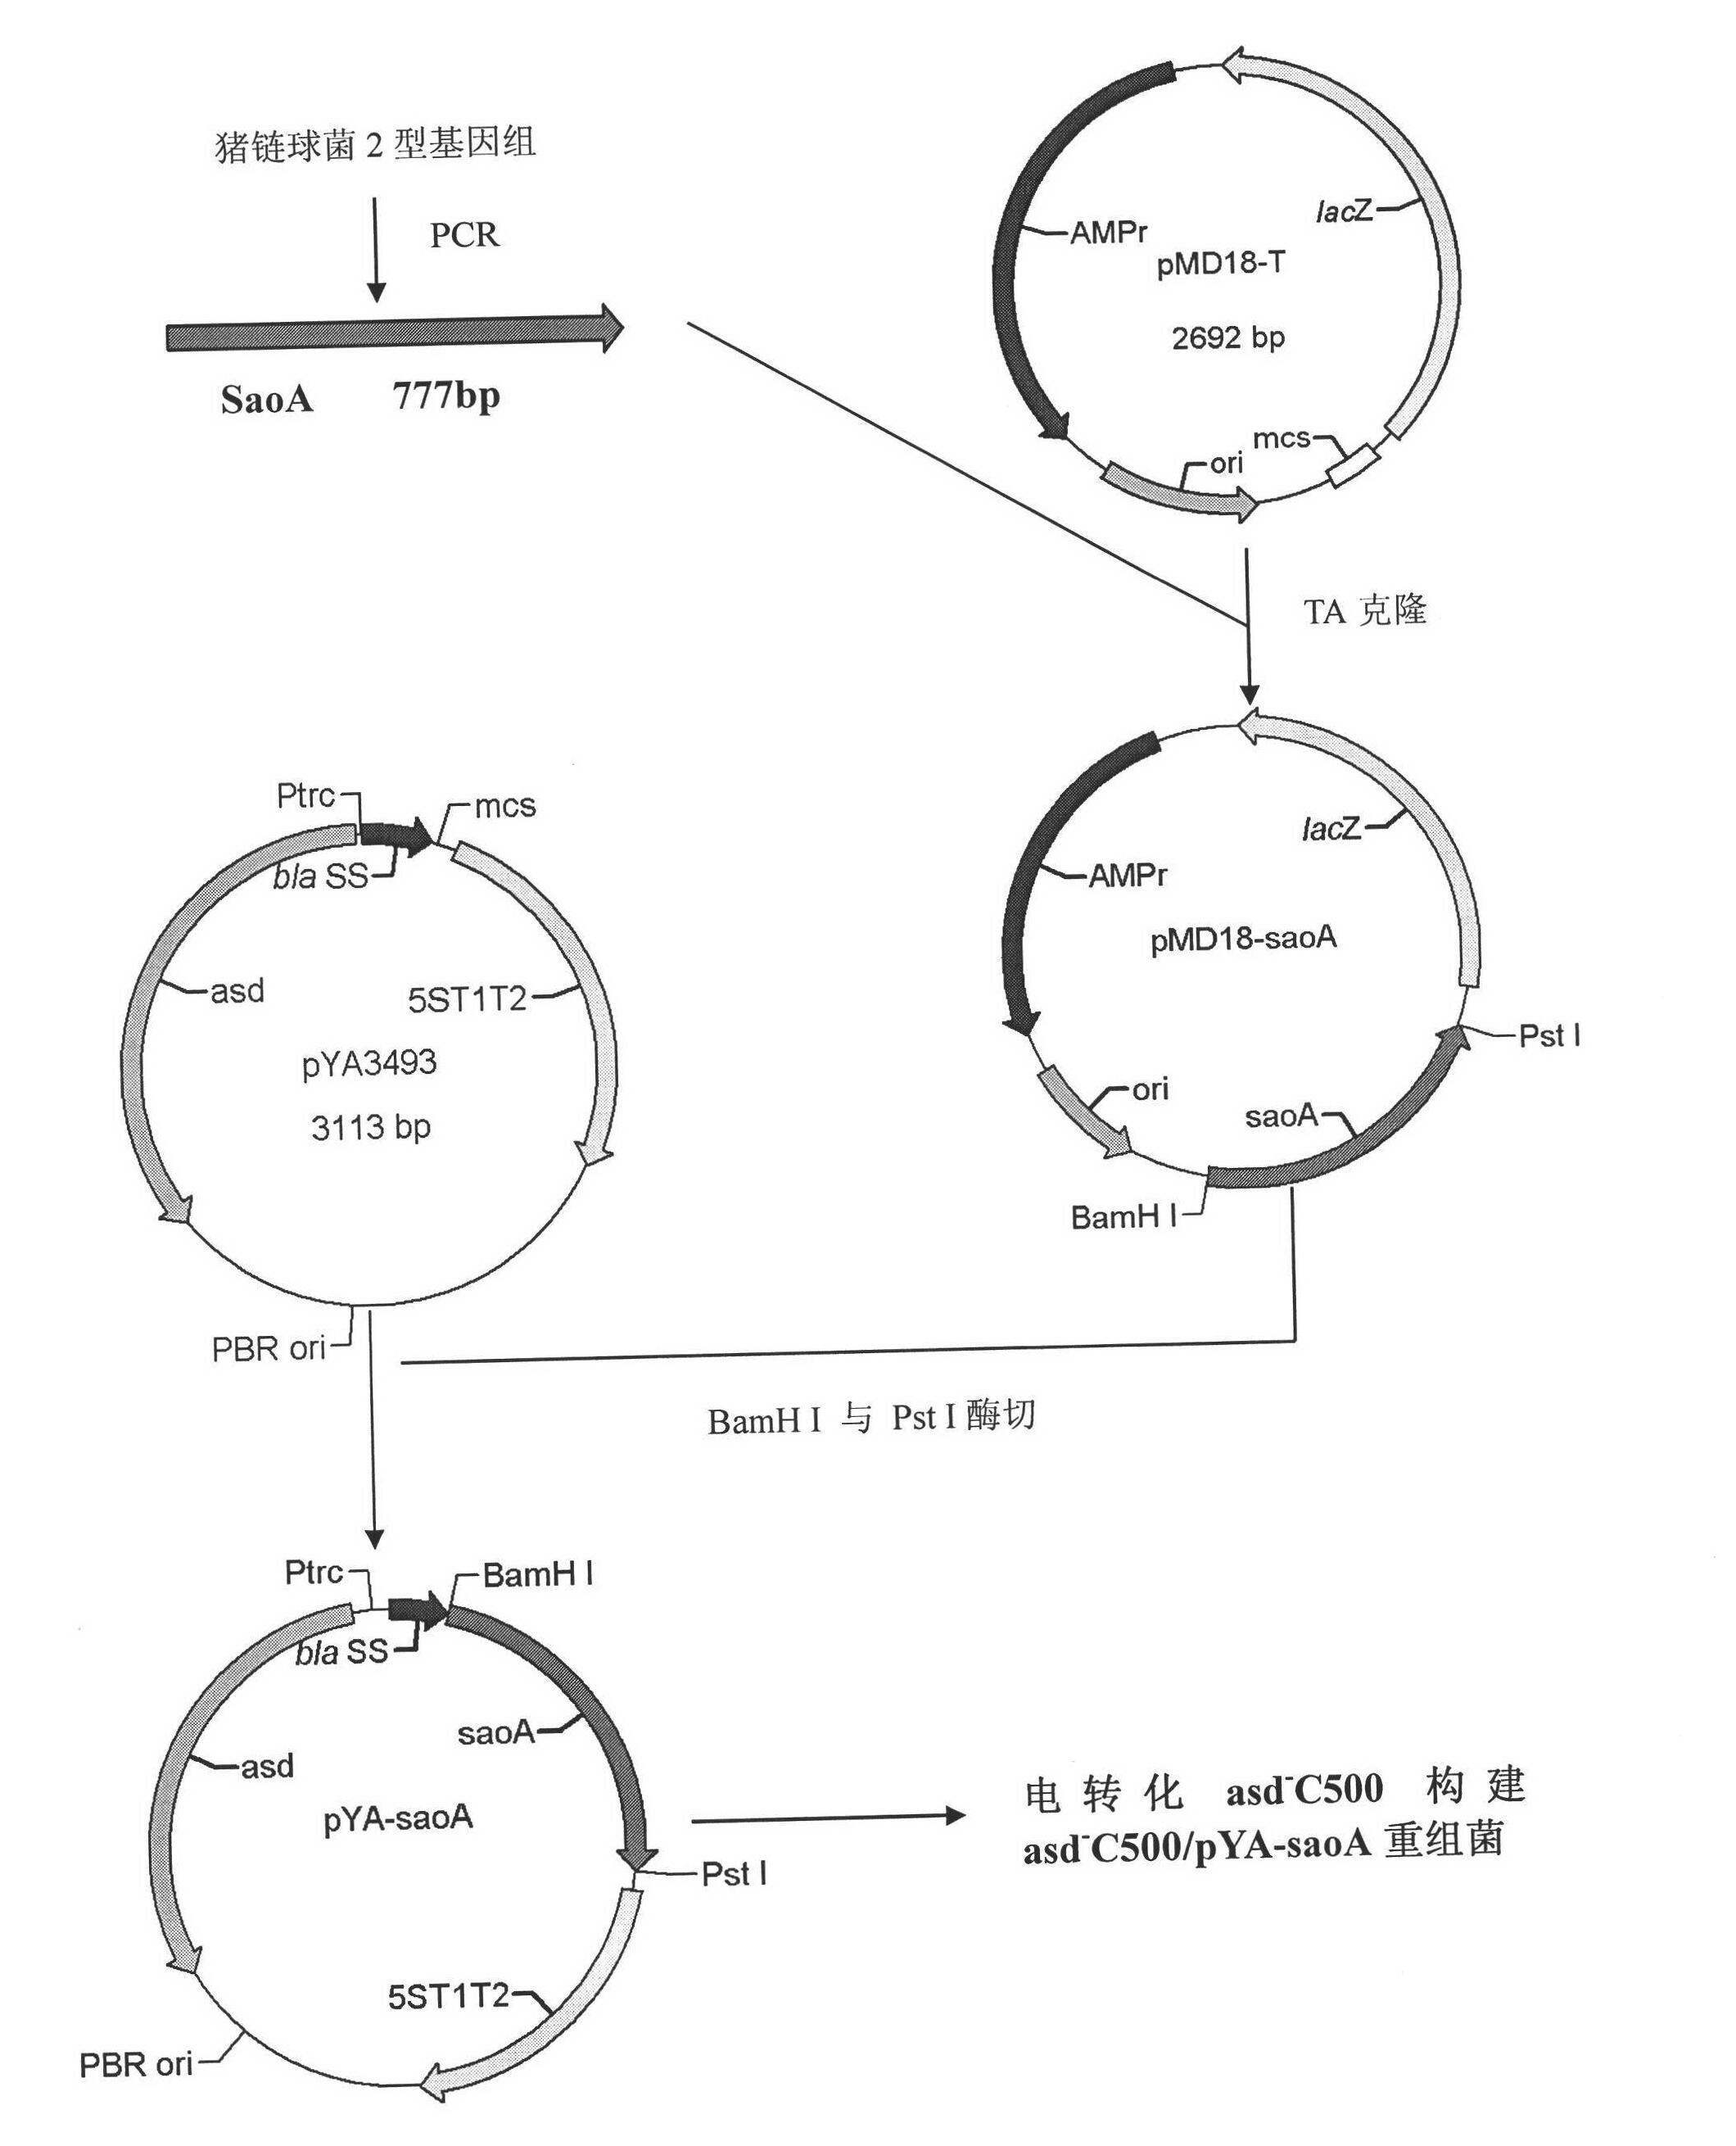 Recombinant Salmonella choleraesuis for expressing surface antigen gene sao of streptococcus suis type 2, vaccine and application